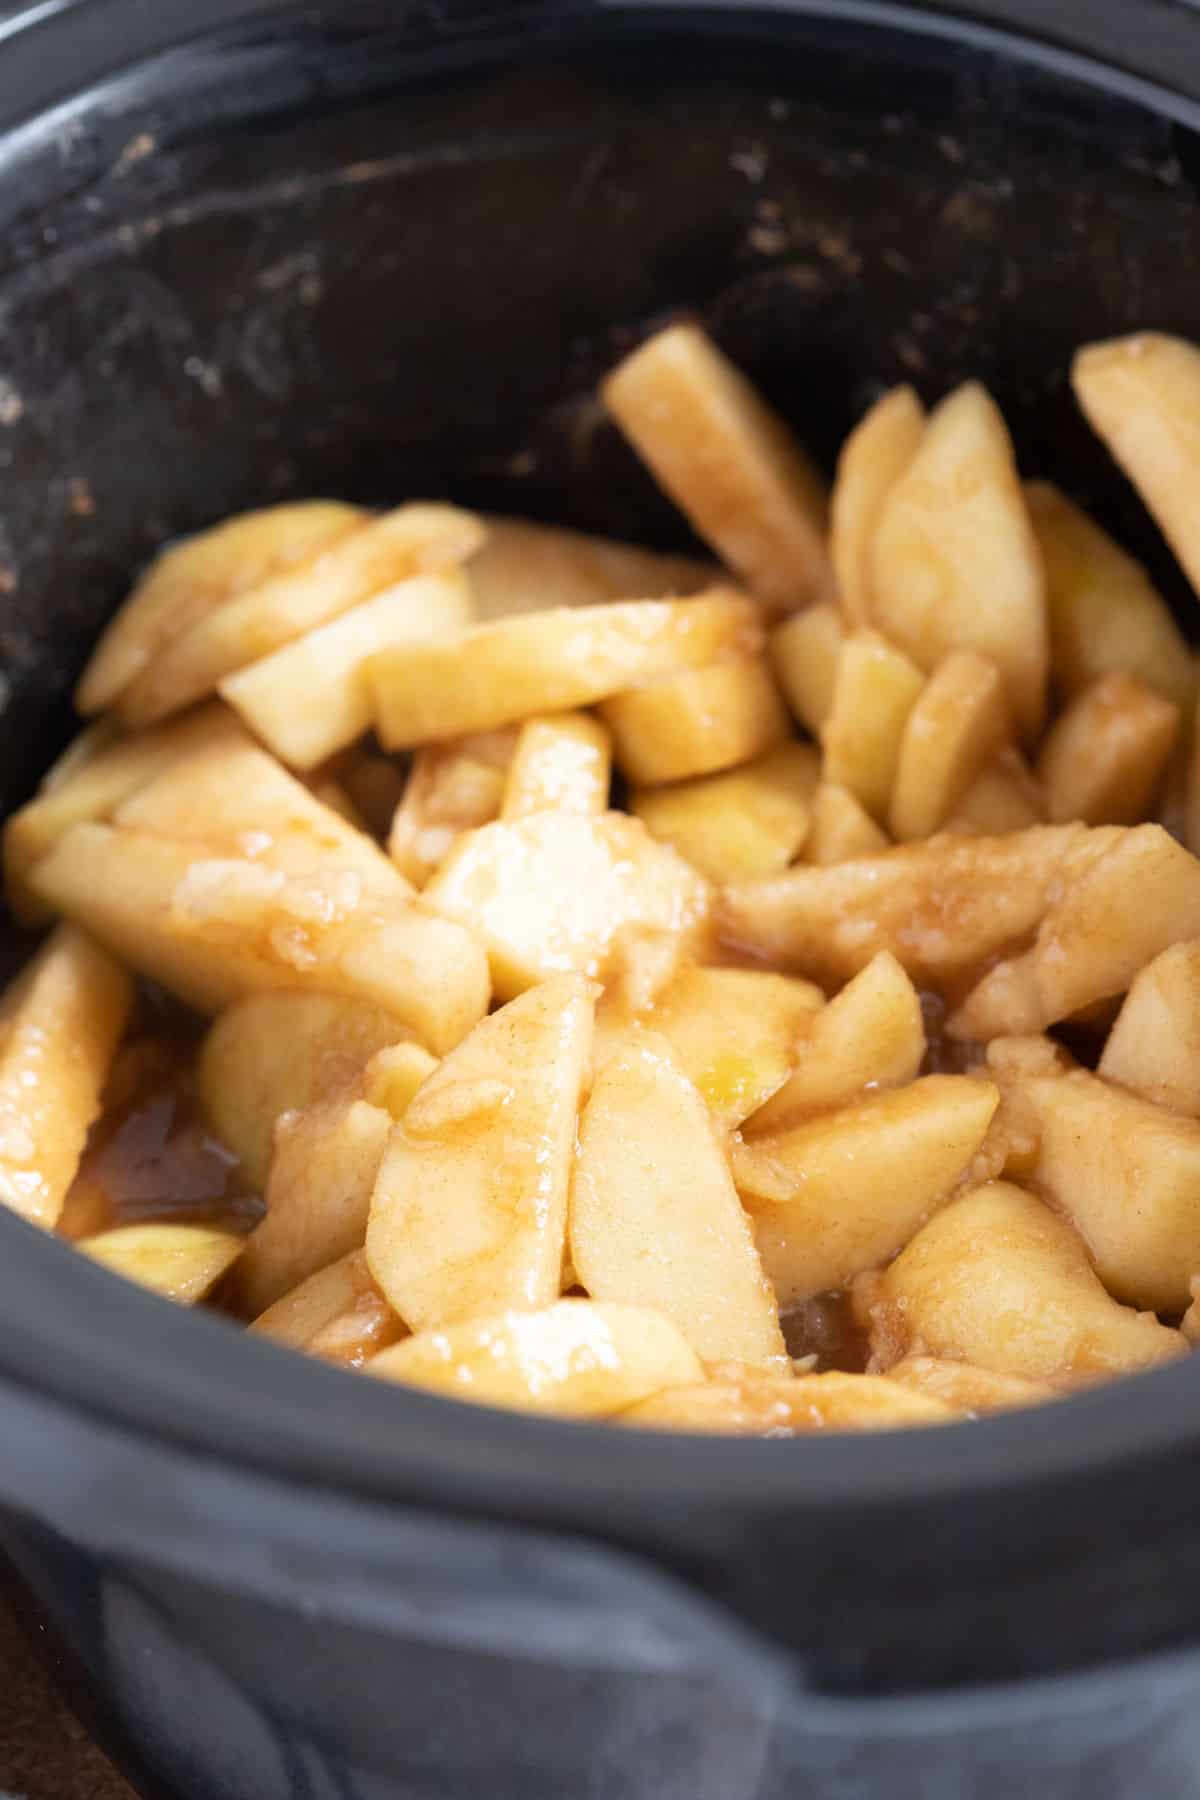 Chopped Bramley apples in a slow cooker.